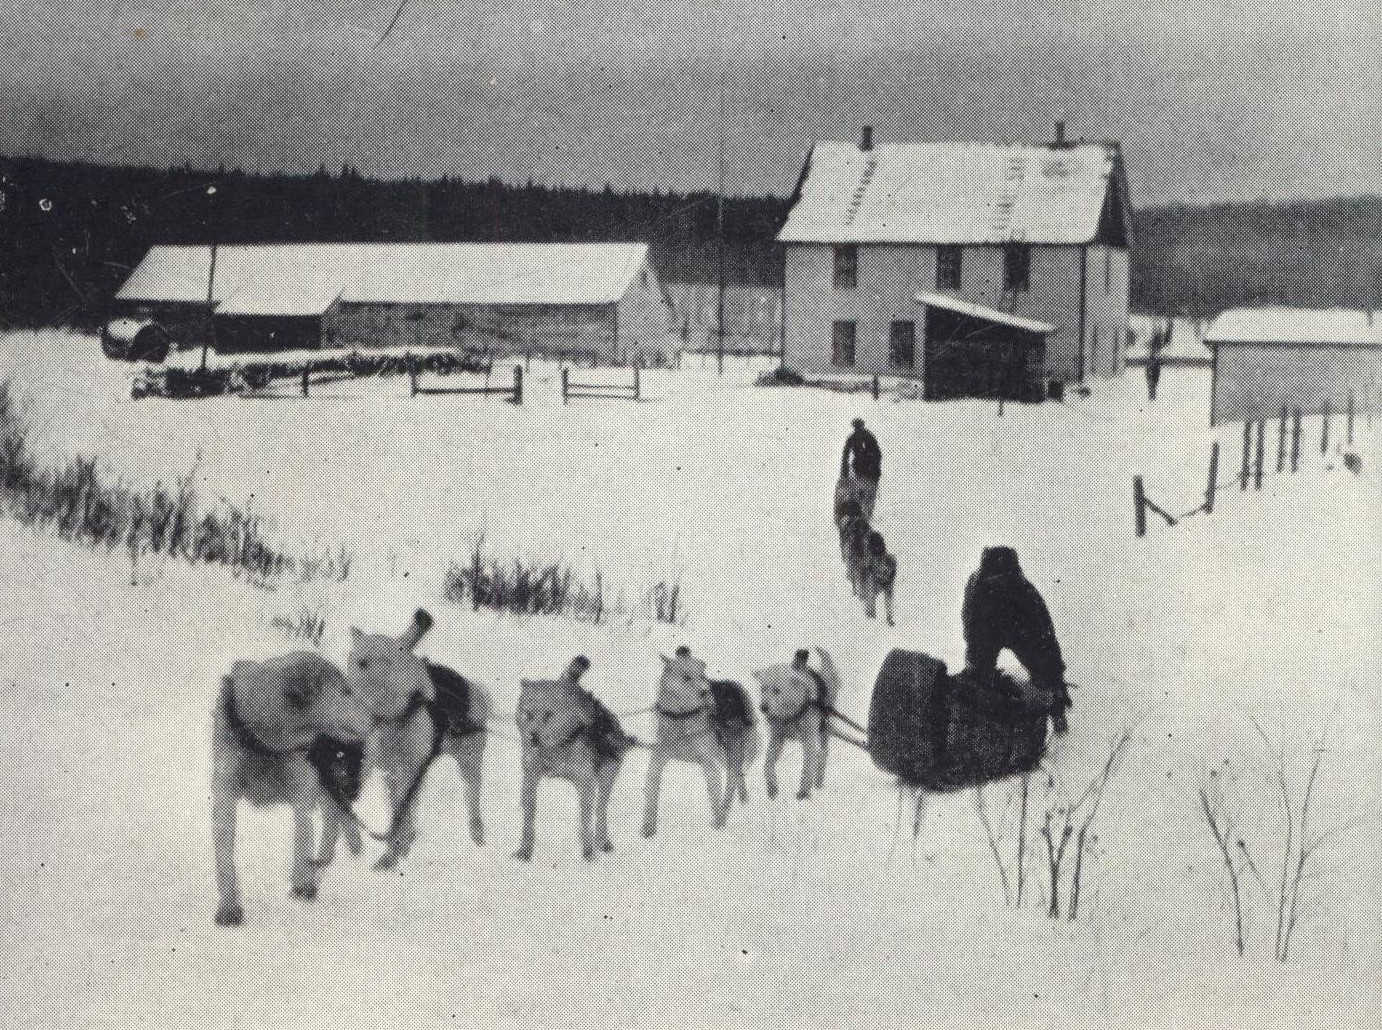 Men travelling by dog sled in winter